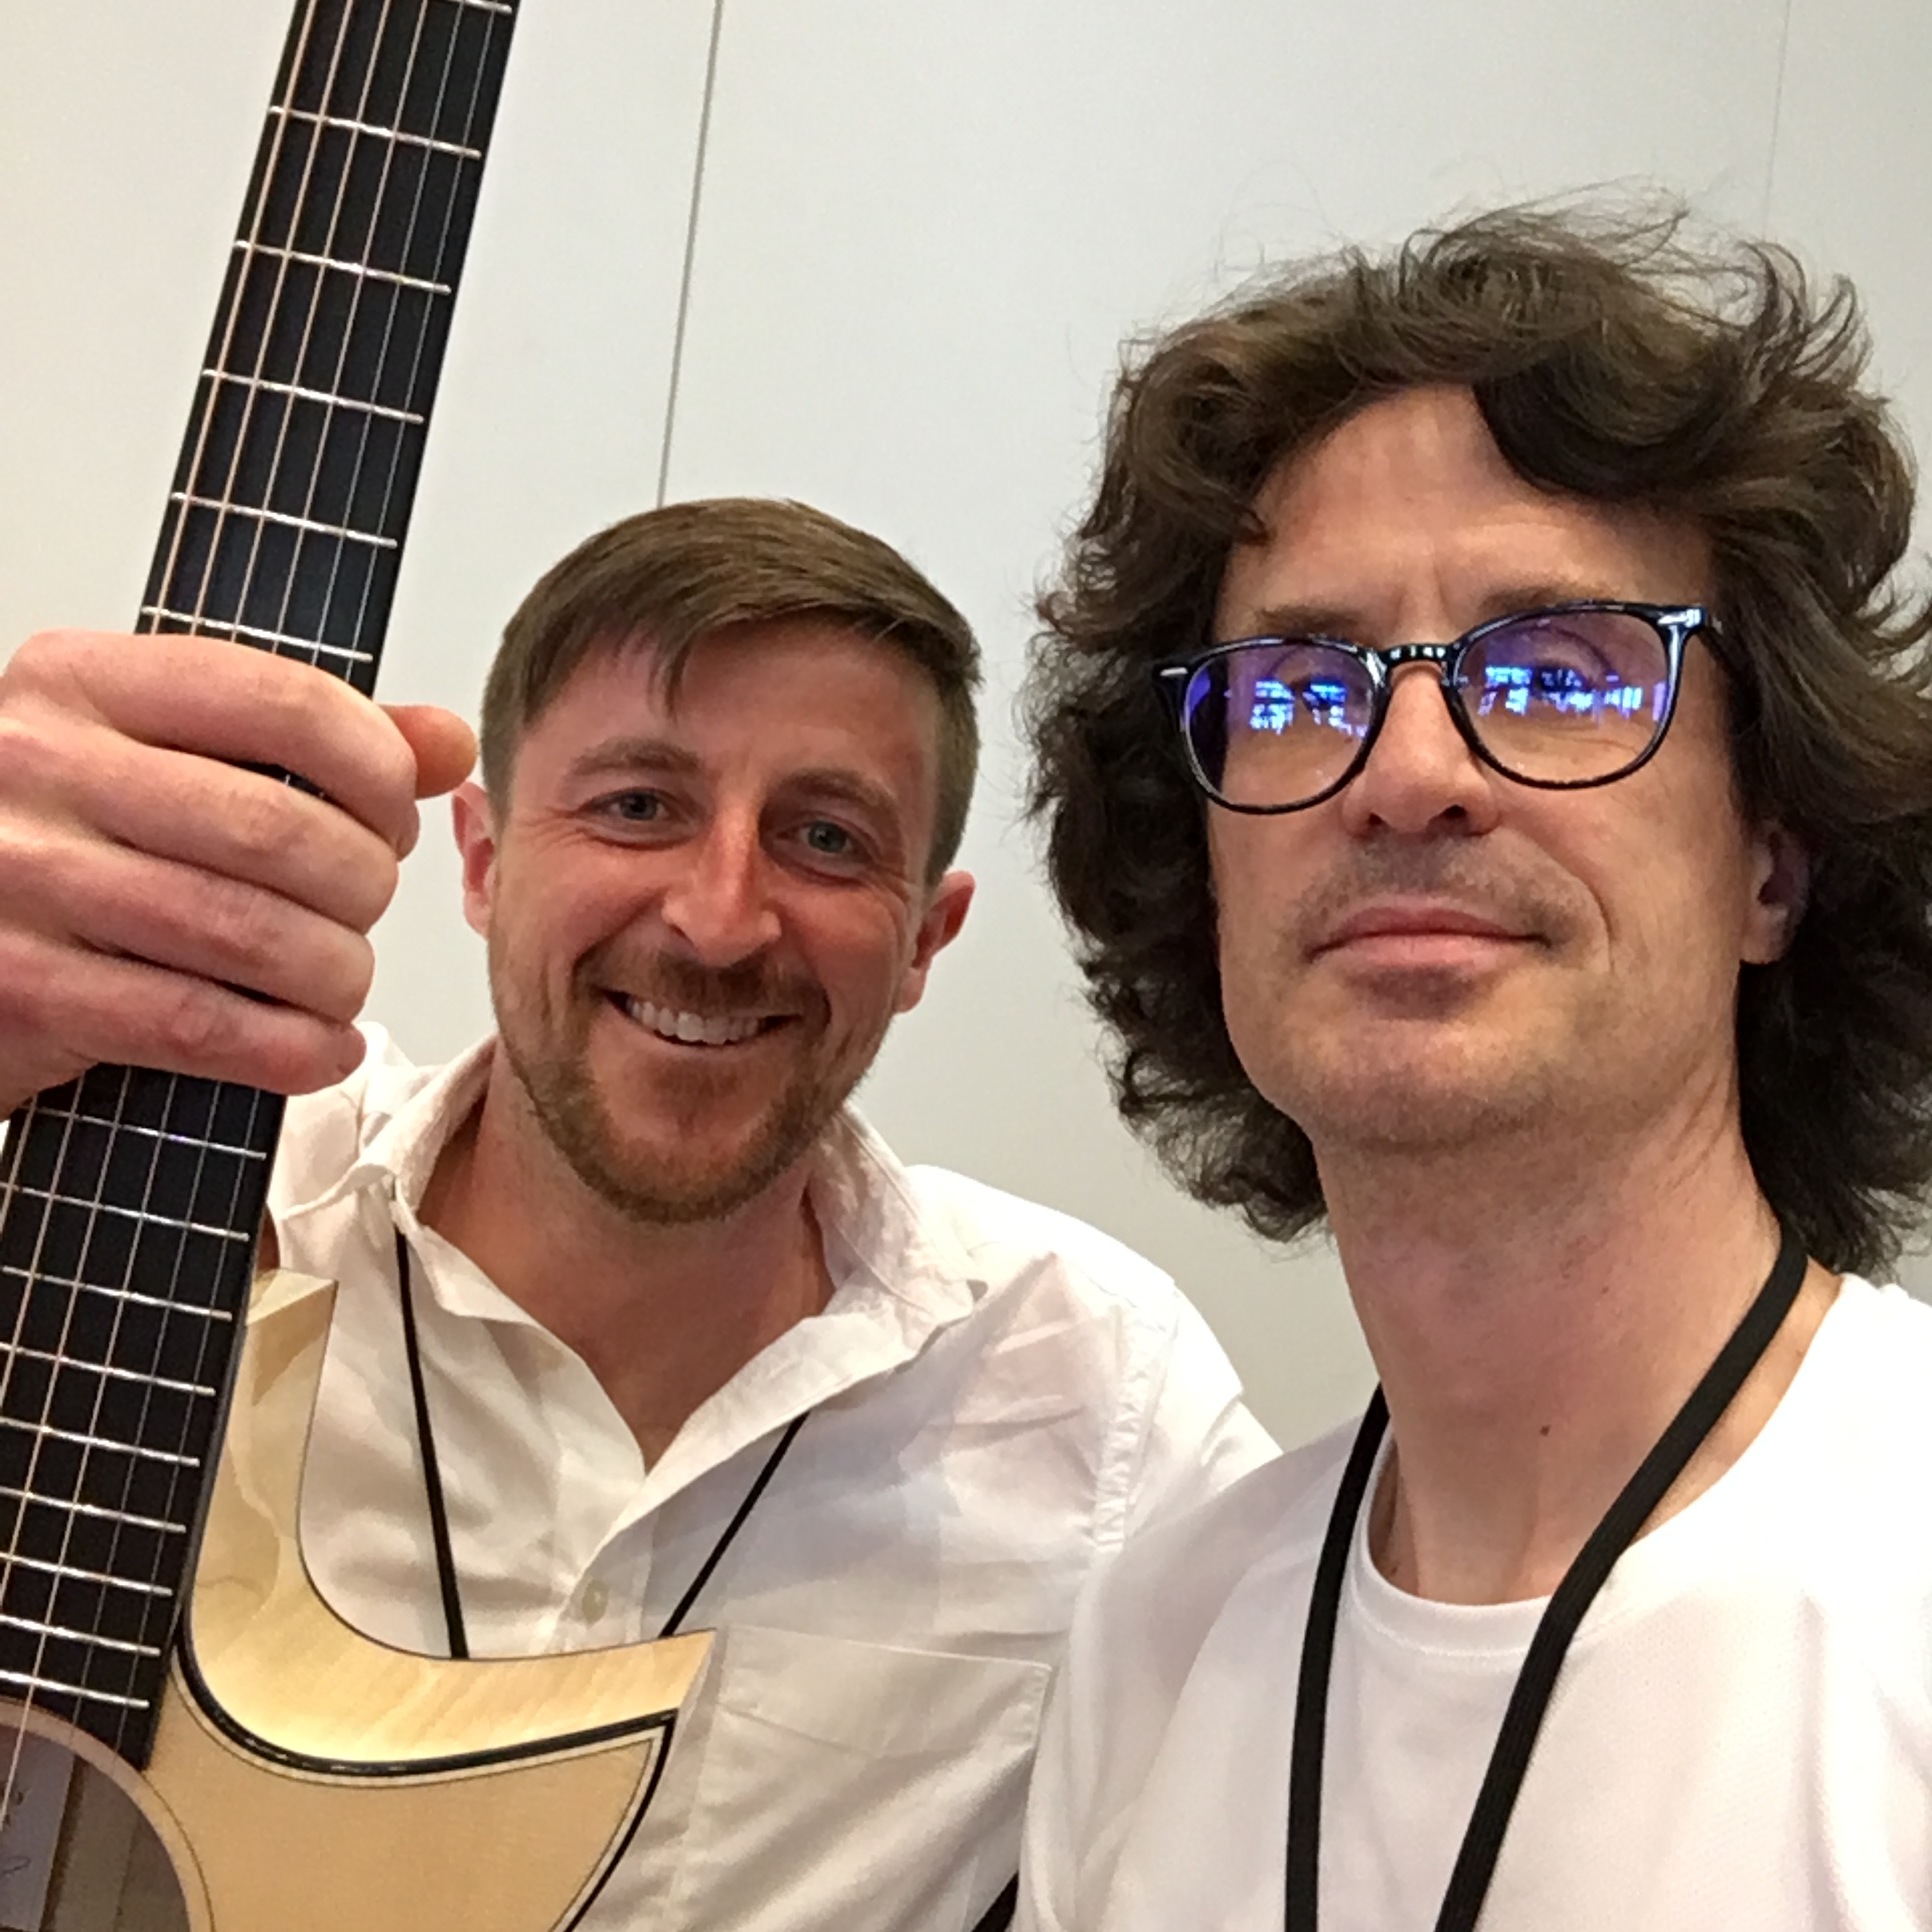 Rory Dowling interview from Taran Guitars at the Holy Grail Guitar Show